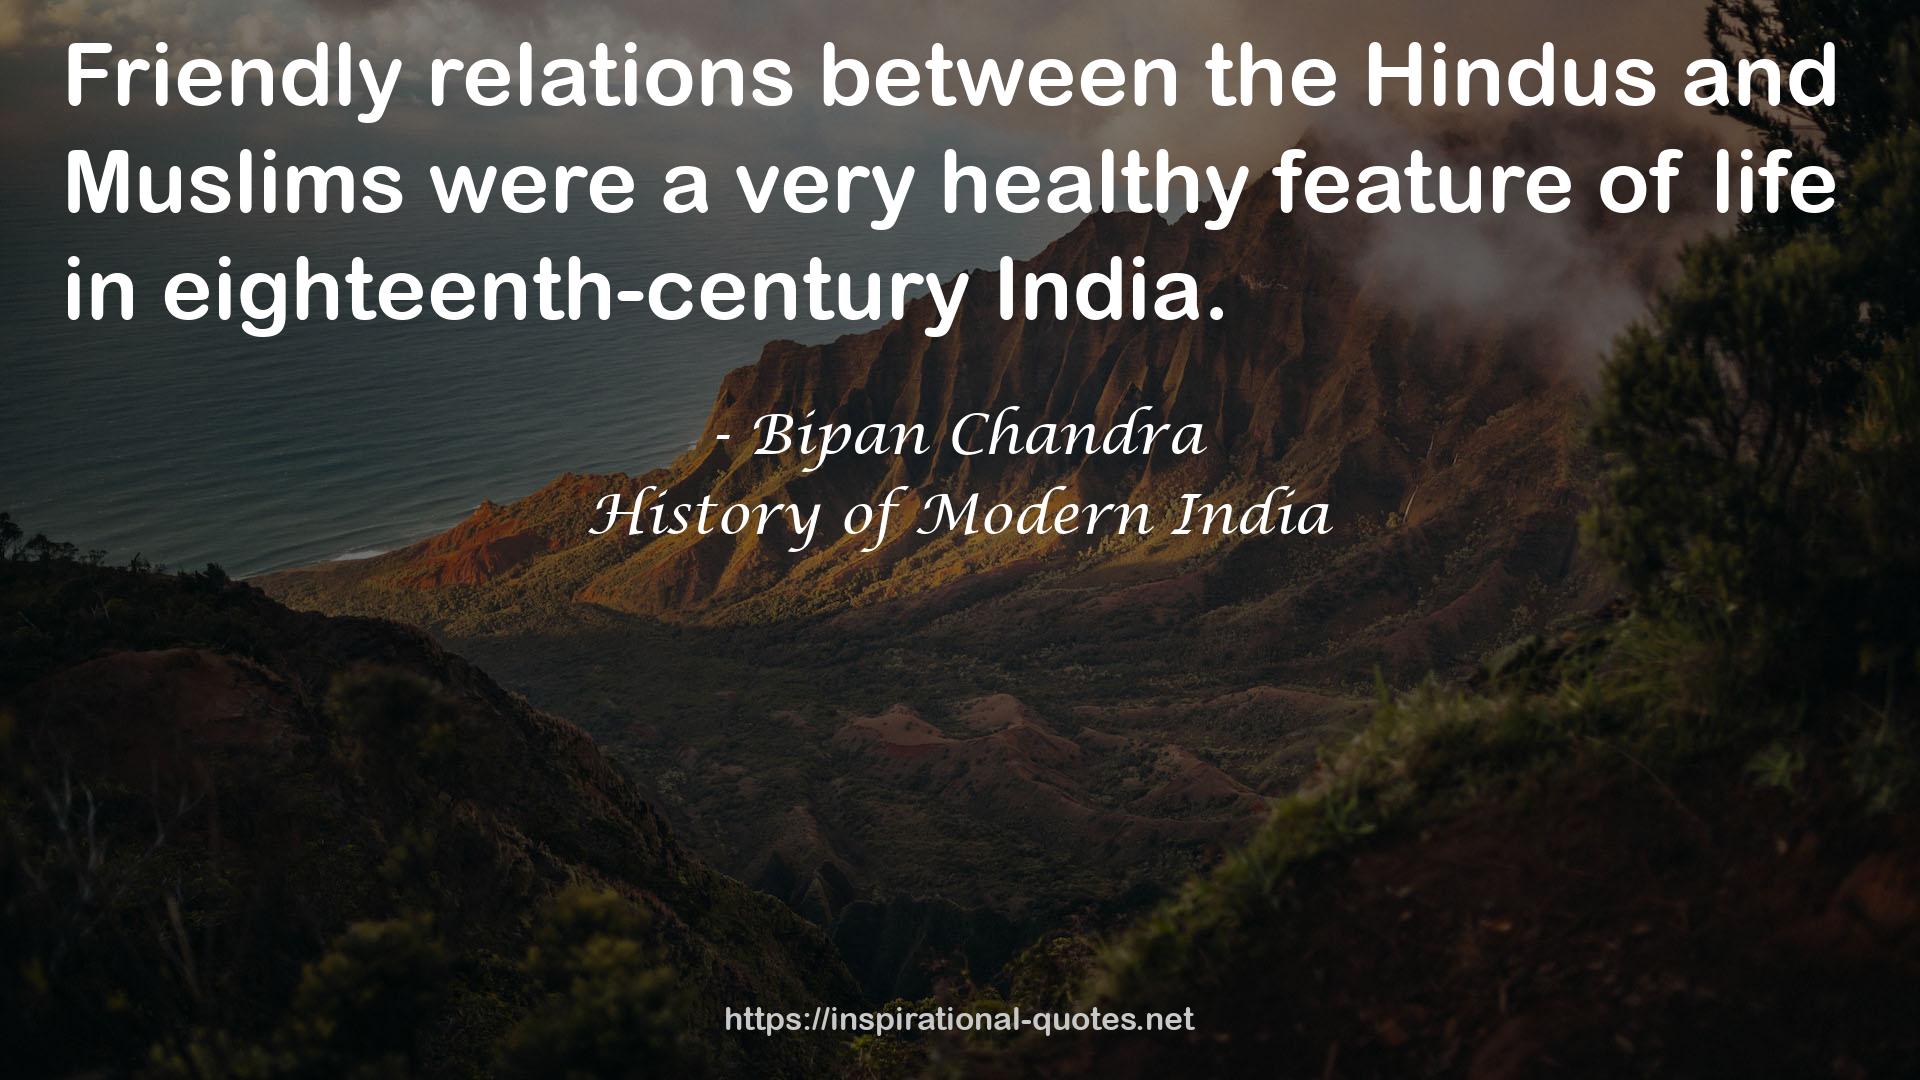 History of Modern India QUOTES